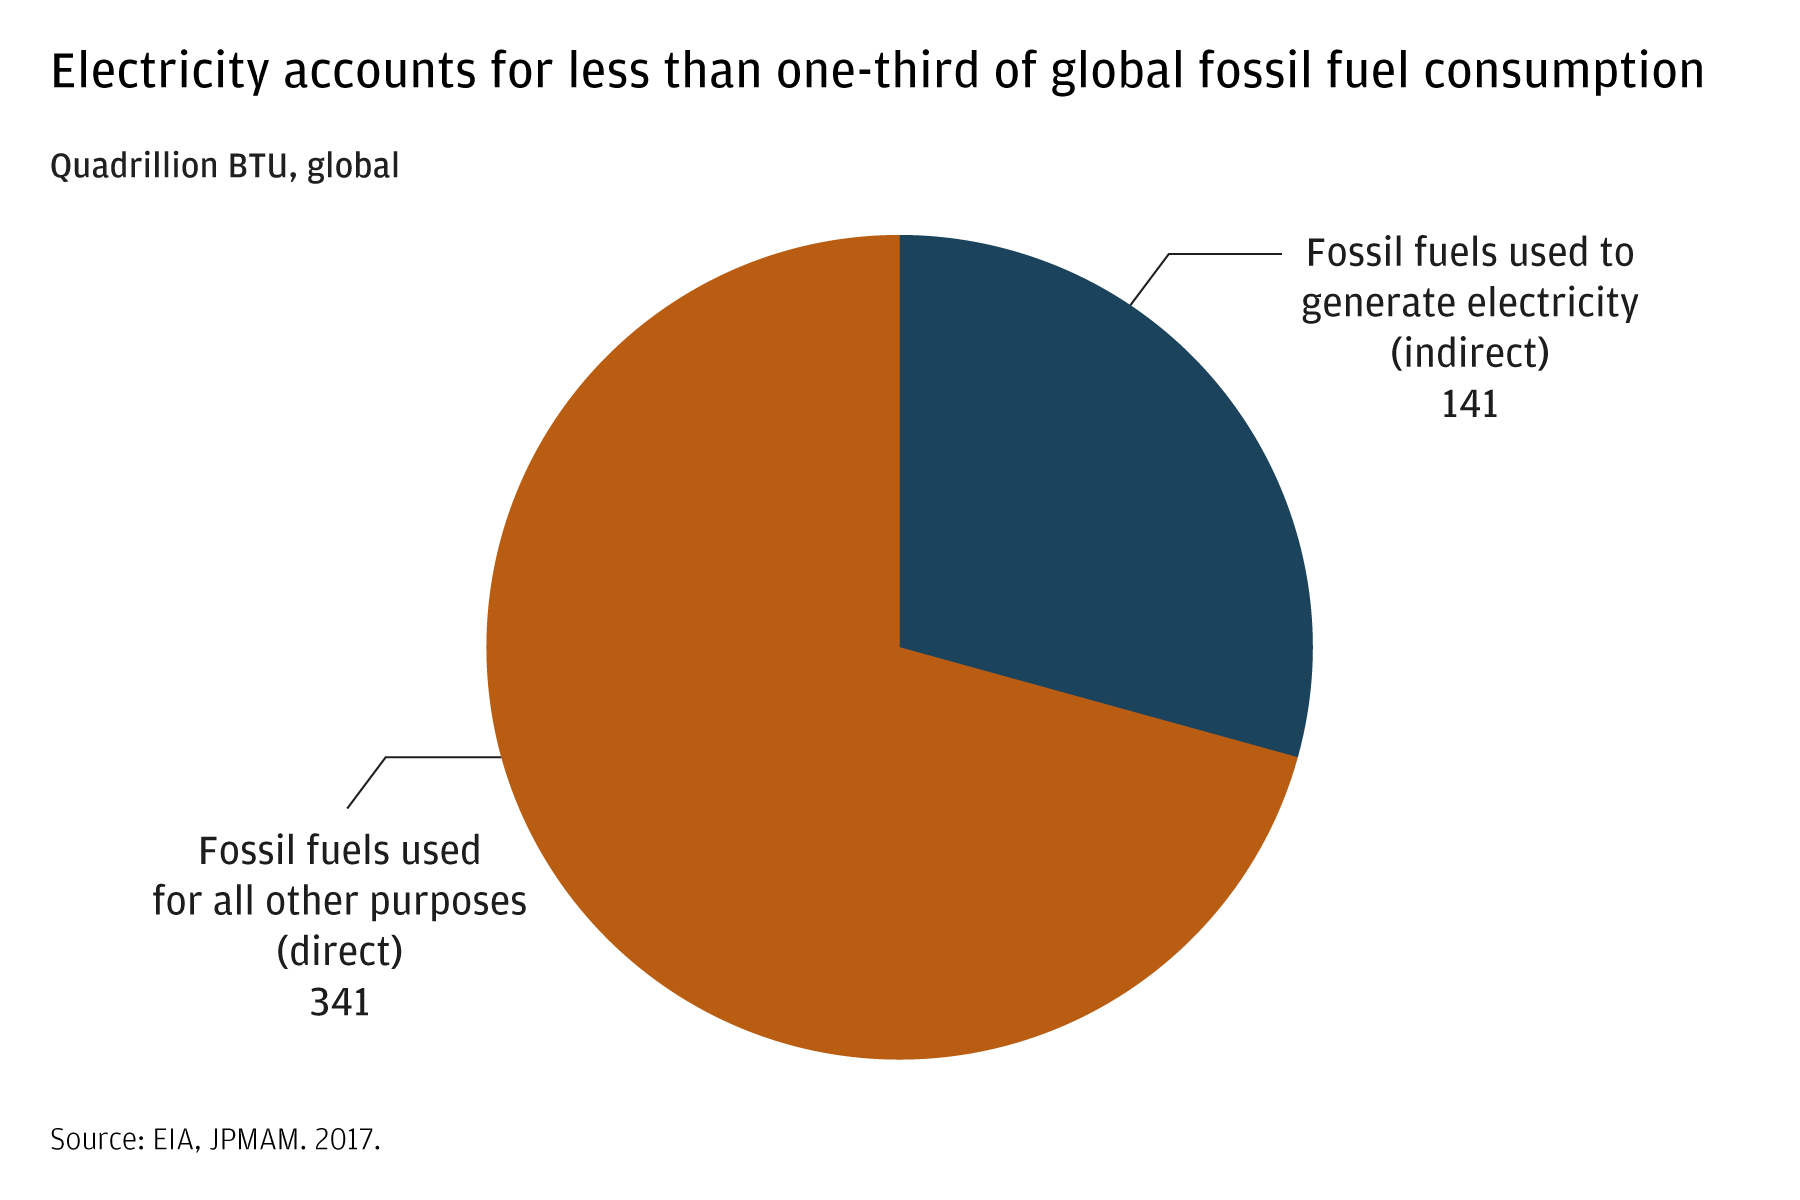 This pie chart shows that nearly three-quarters of fossil fuels are used for purposes other than electricity generation. 